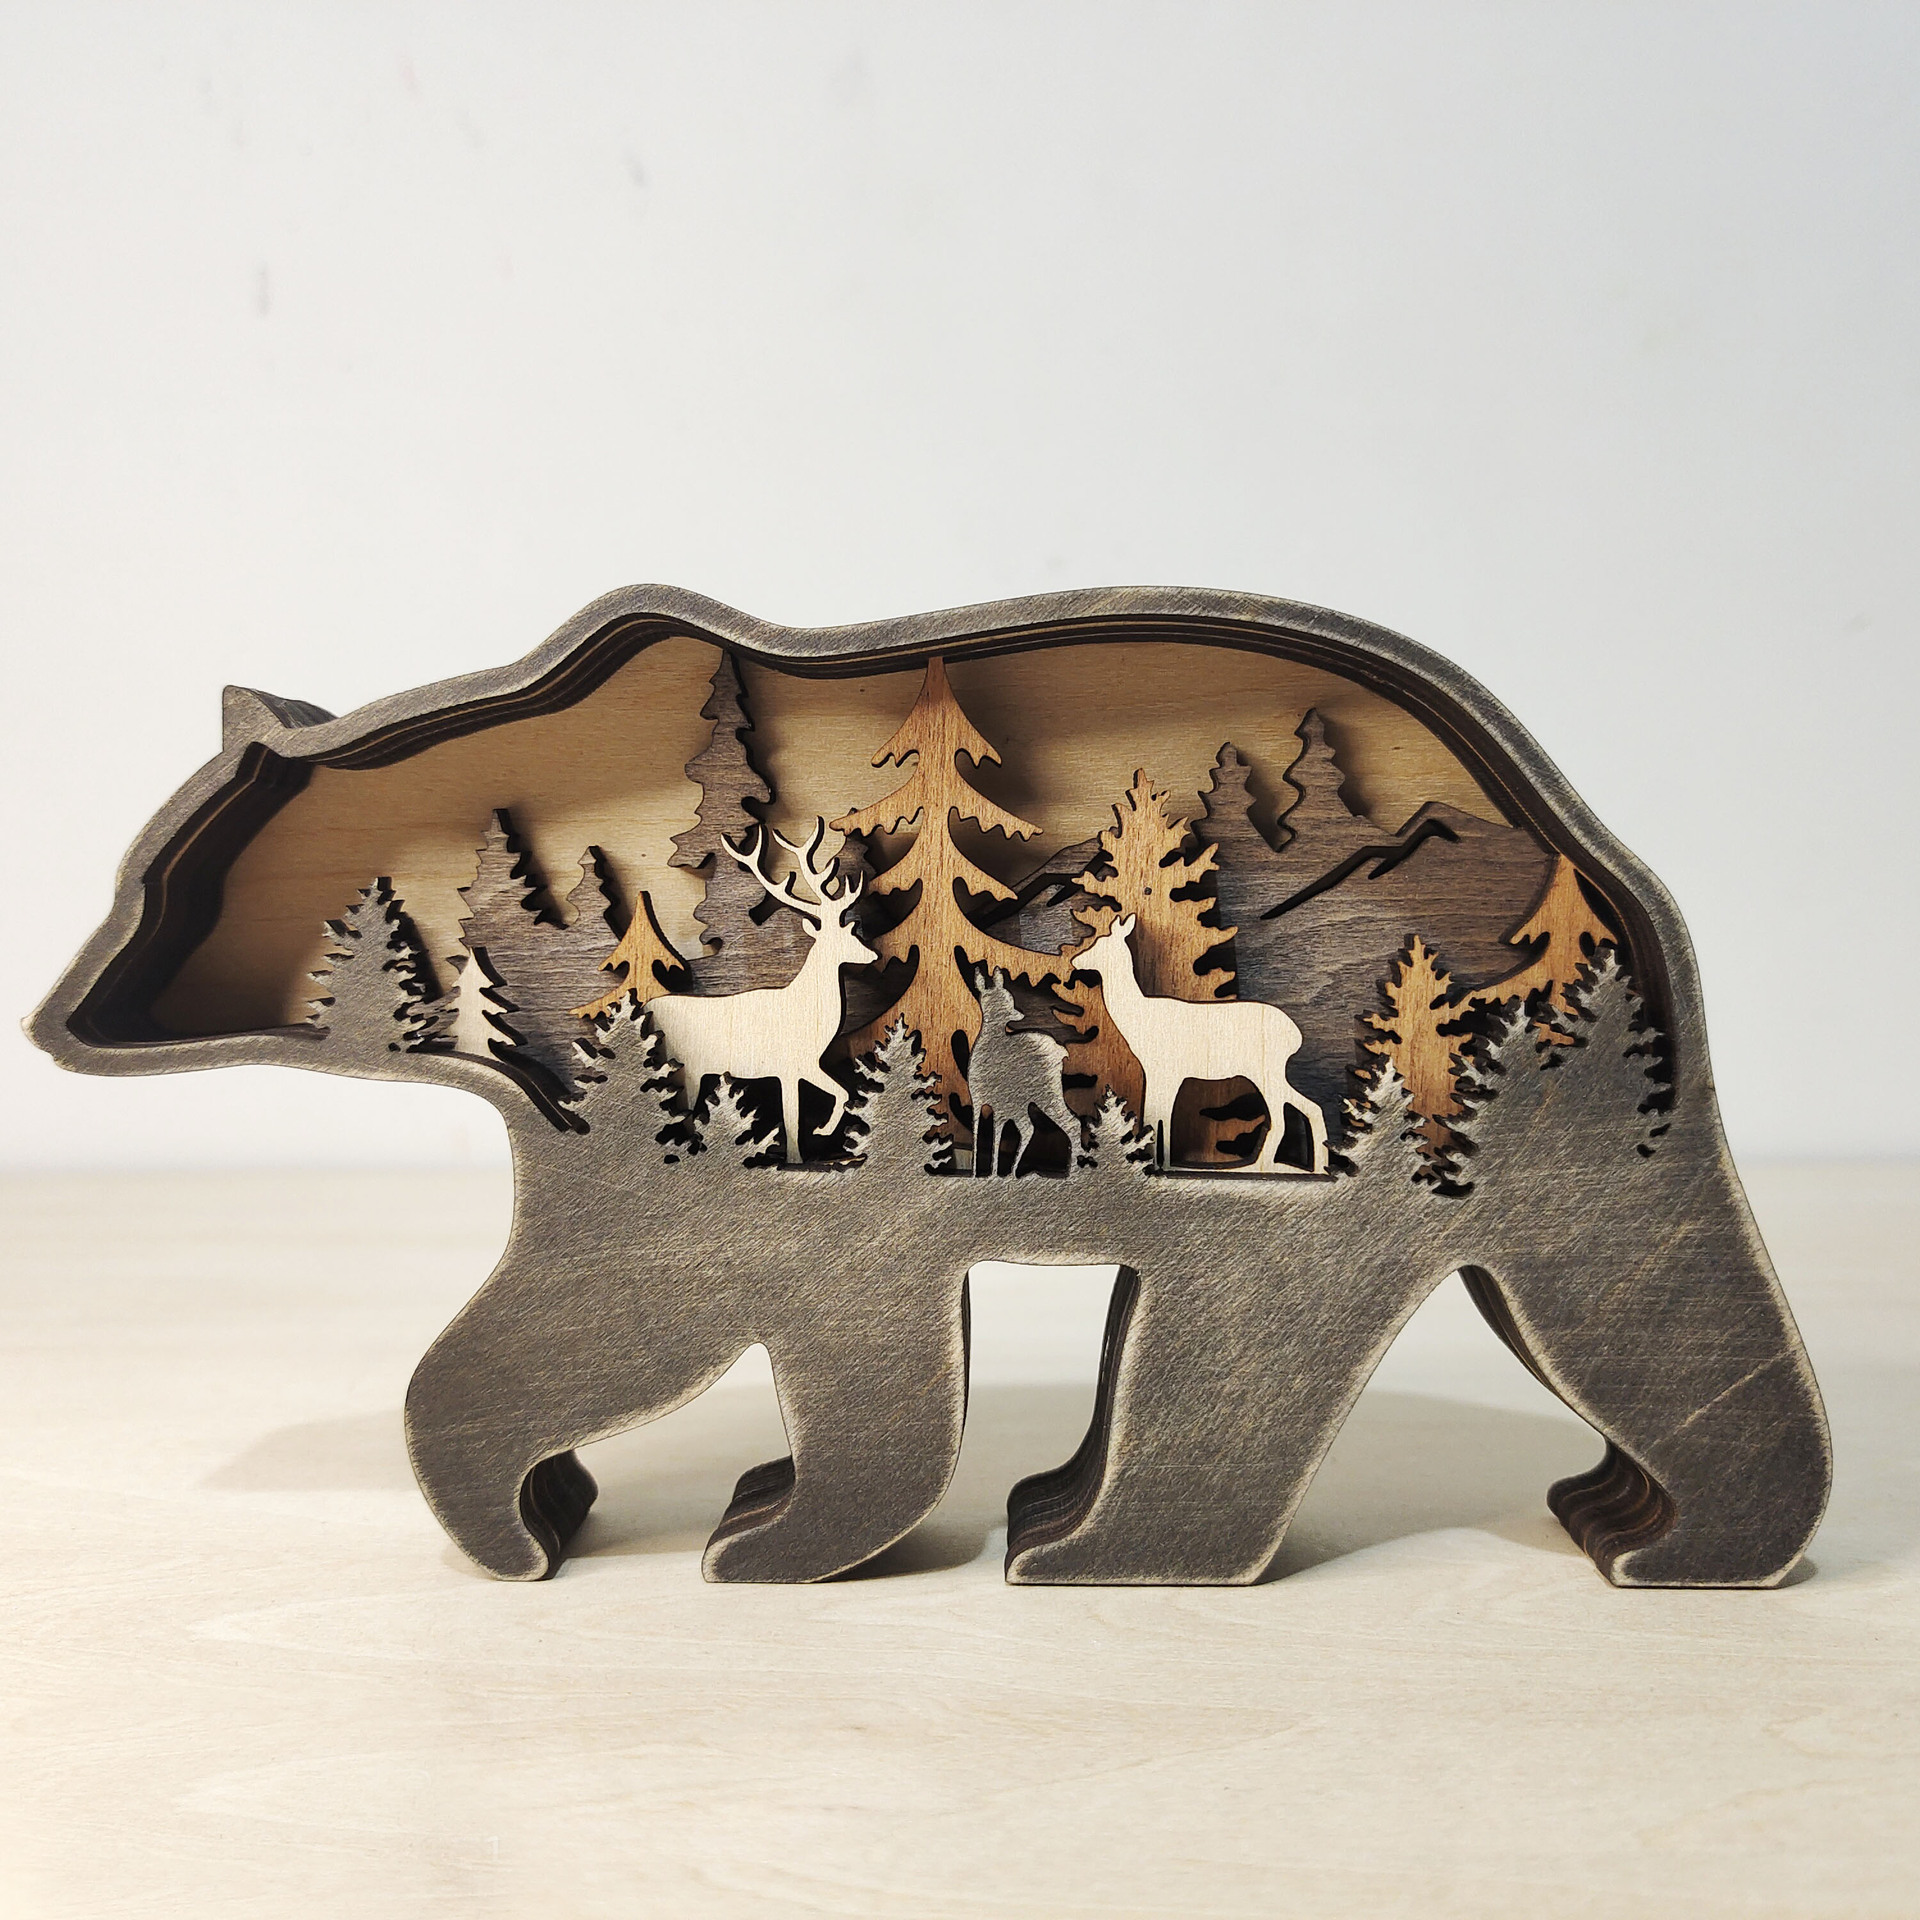 New Christmas Wooden Crafts Creativity North American Forest Animals Home Decoration Elk Brown Bear Ornaments